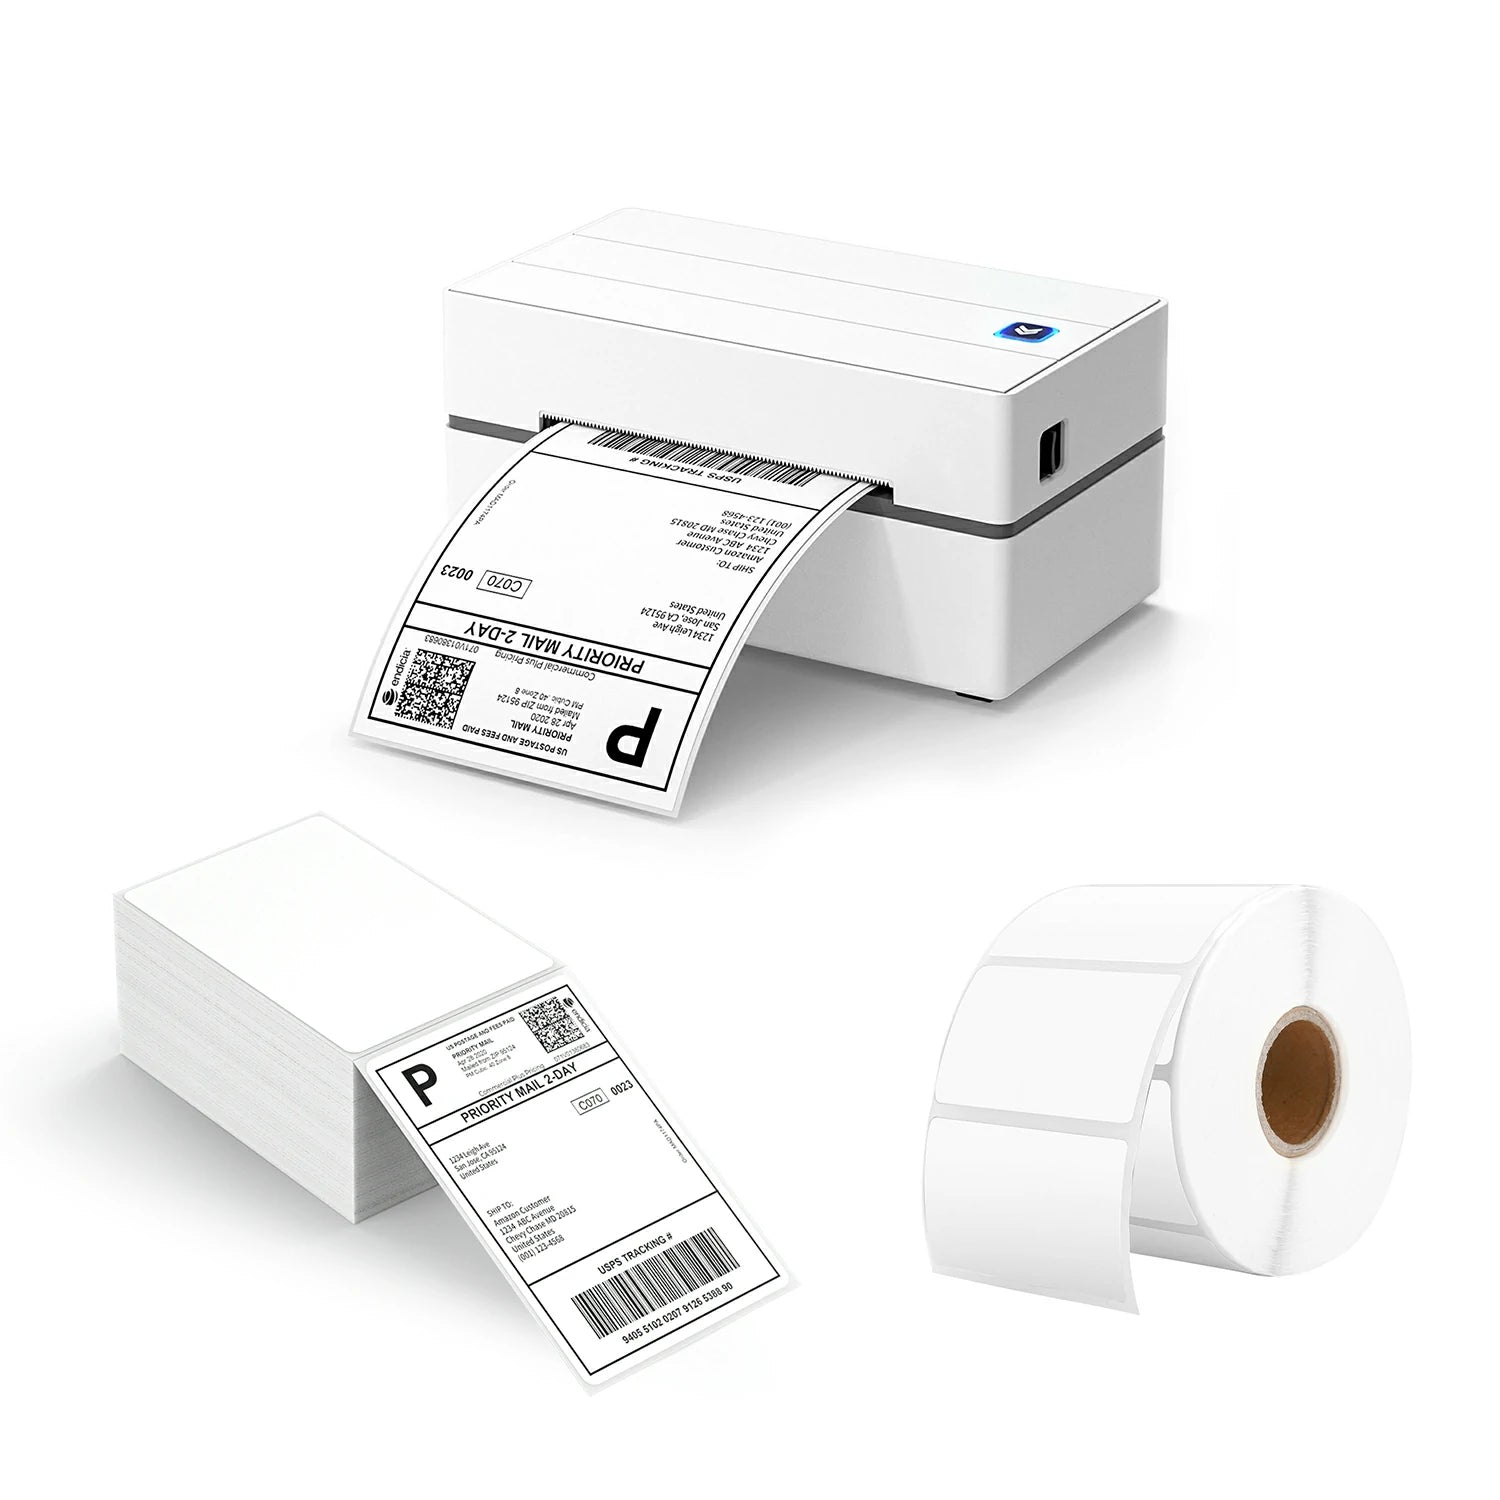 The MUNBYN 130 thermal printer kit includes a USB thermal label printer, a stack of shipping labels, and a roll of rectangle labels.